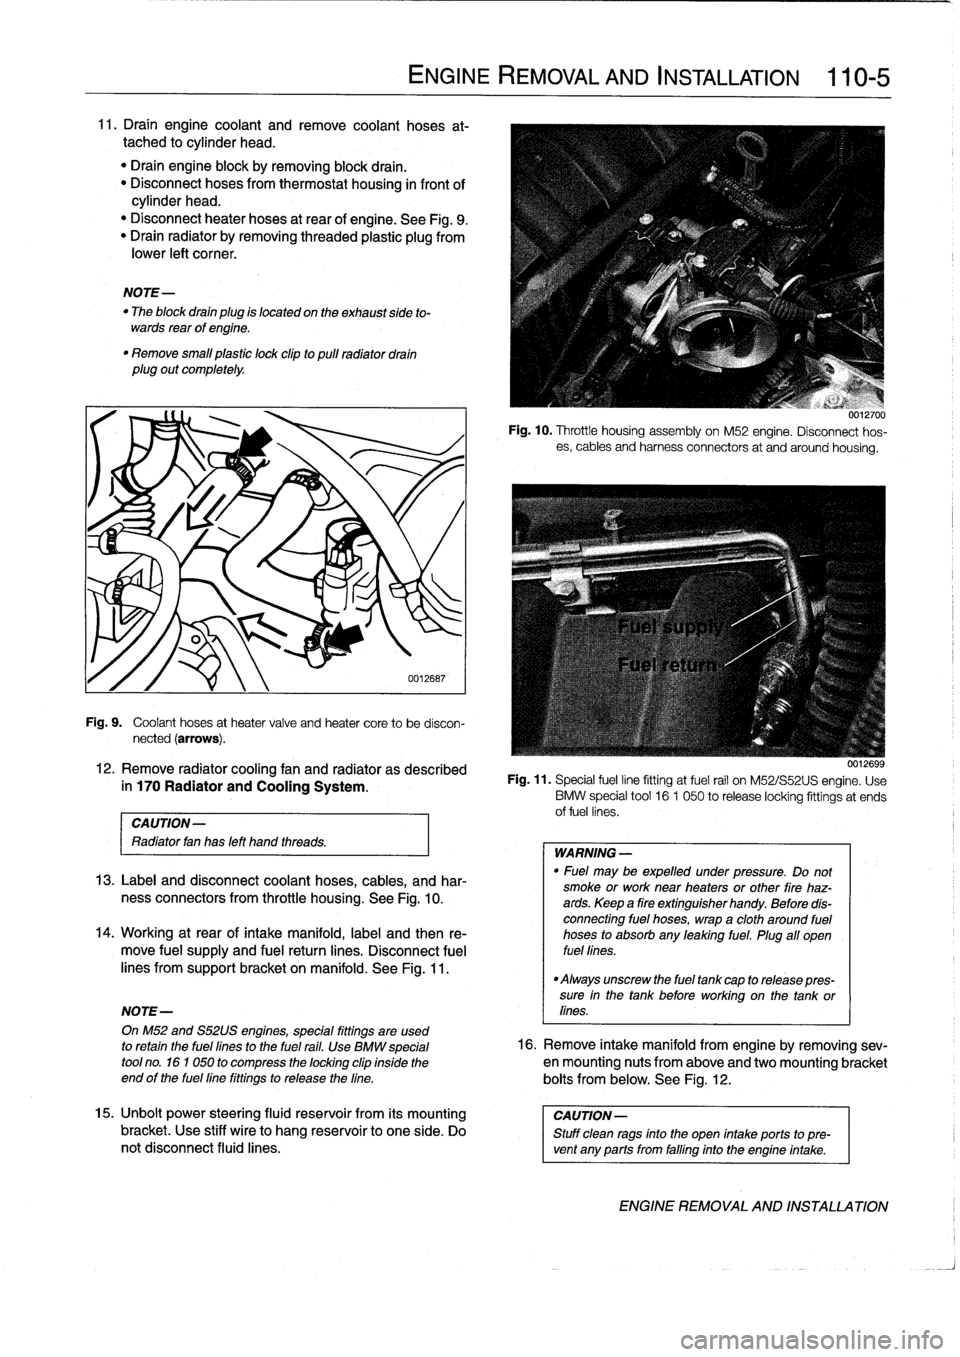 BMW M3 1993 E36 Workshop Manual 
11
.
Draín
engine
coolant
and
Rmove
coolant
hoses
at-
tached
to
cylinder
head
.

"
Drain
engine
block
byremoving
block
drain
.
"
Disconnect
hoses
from
thermostat
housing
in
front
of
cylinder
head
.
